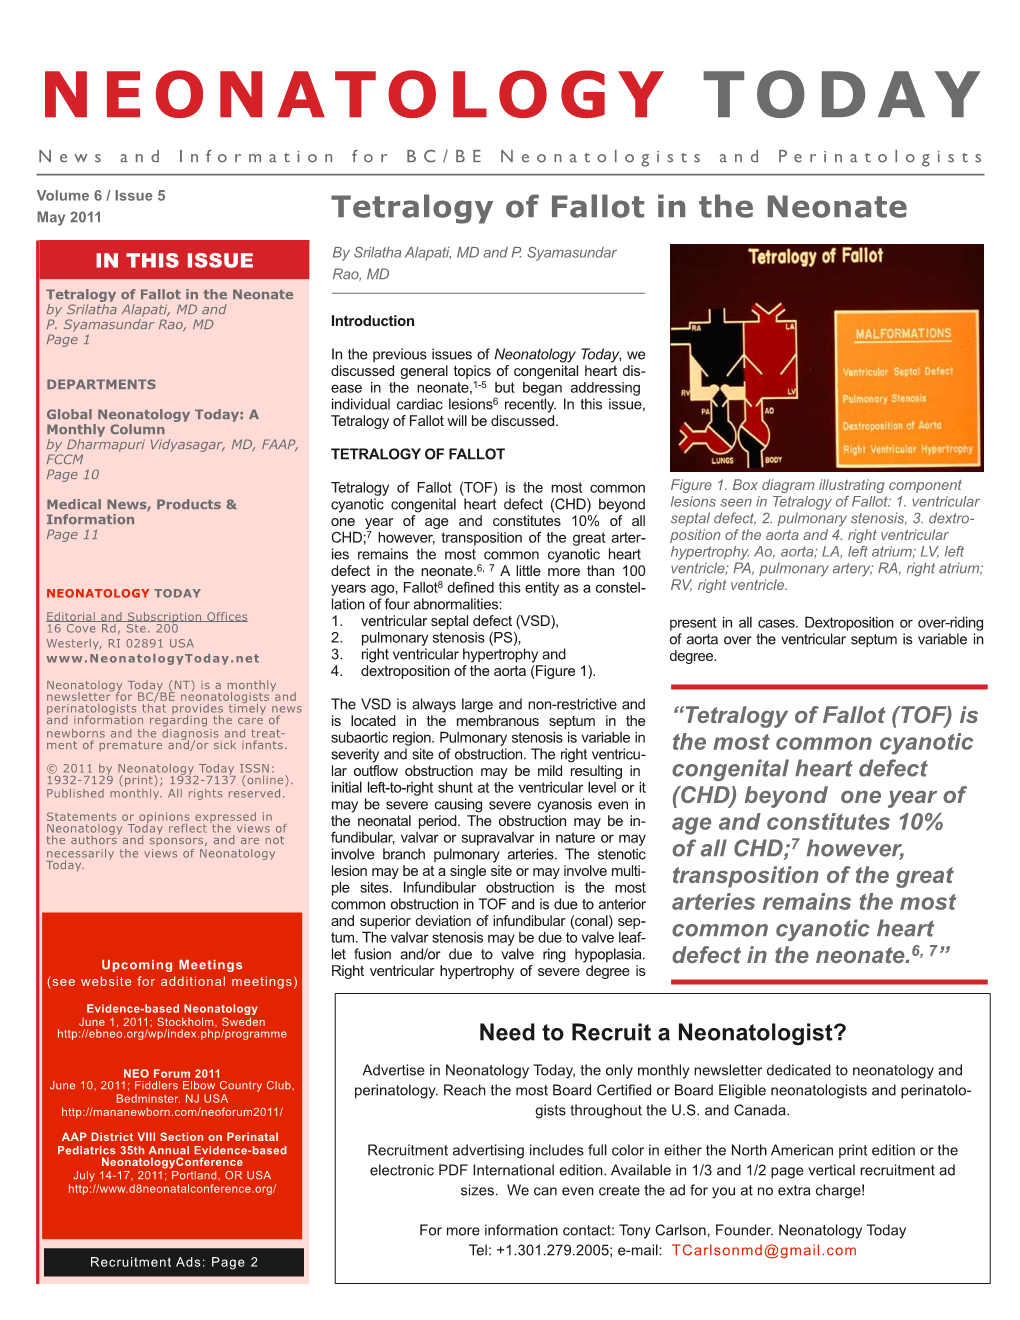 May 2011 Tetralogy of Fallot in the Neonate